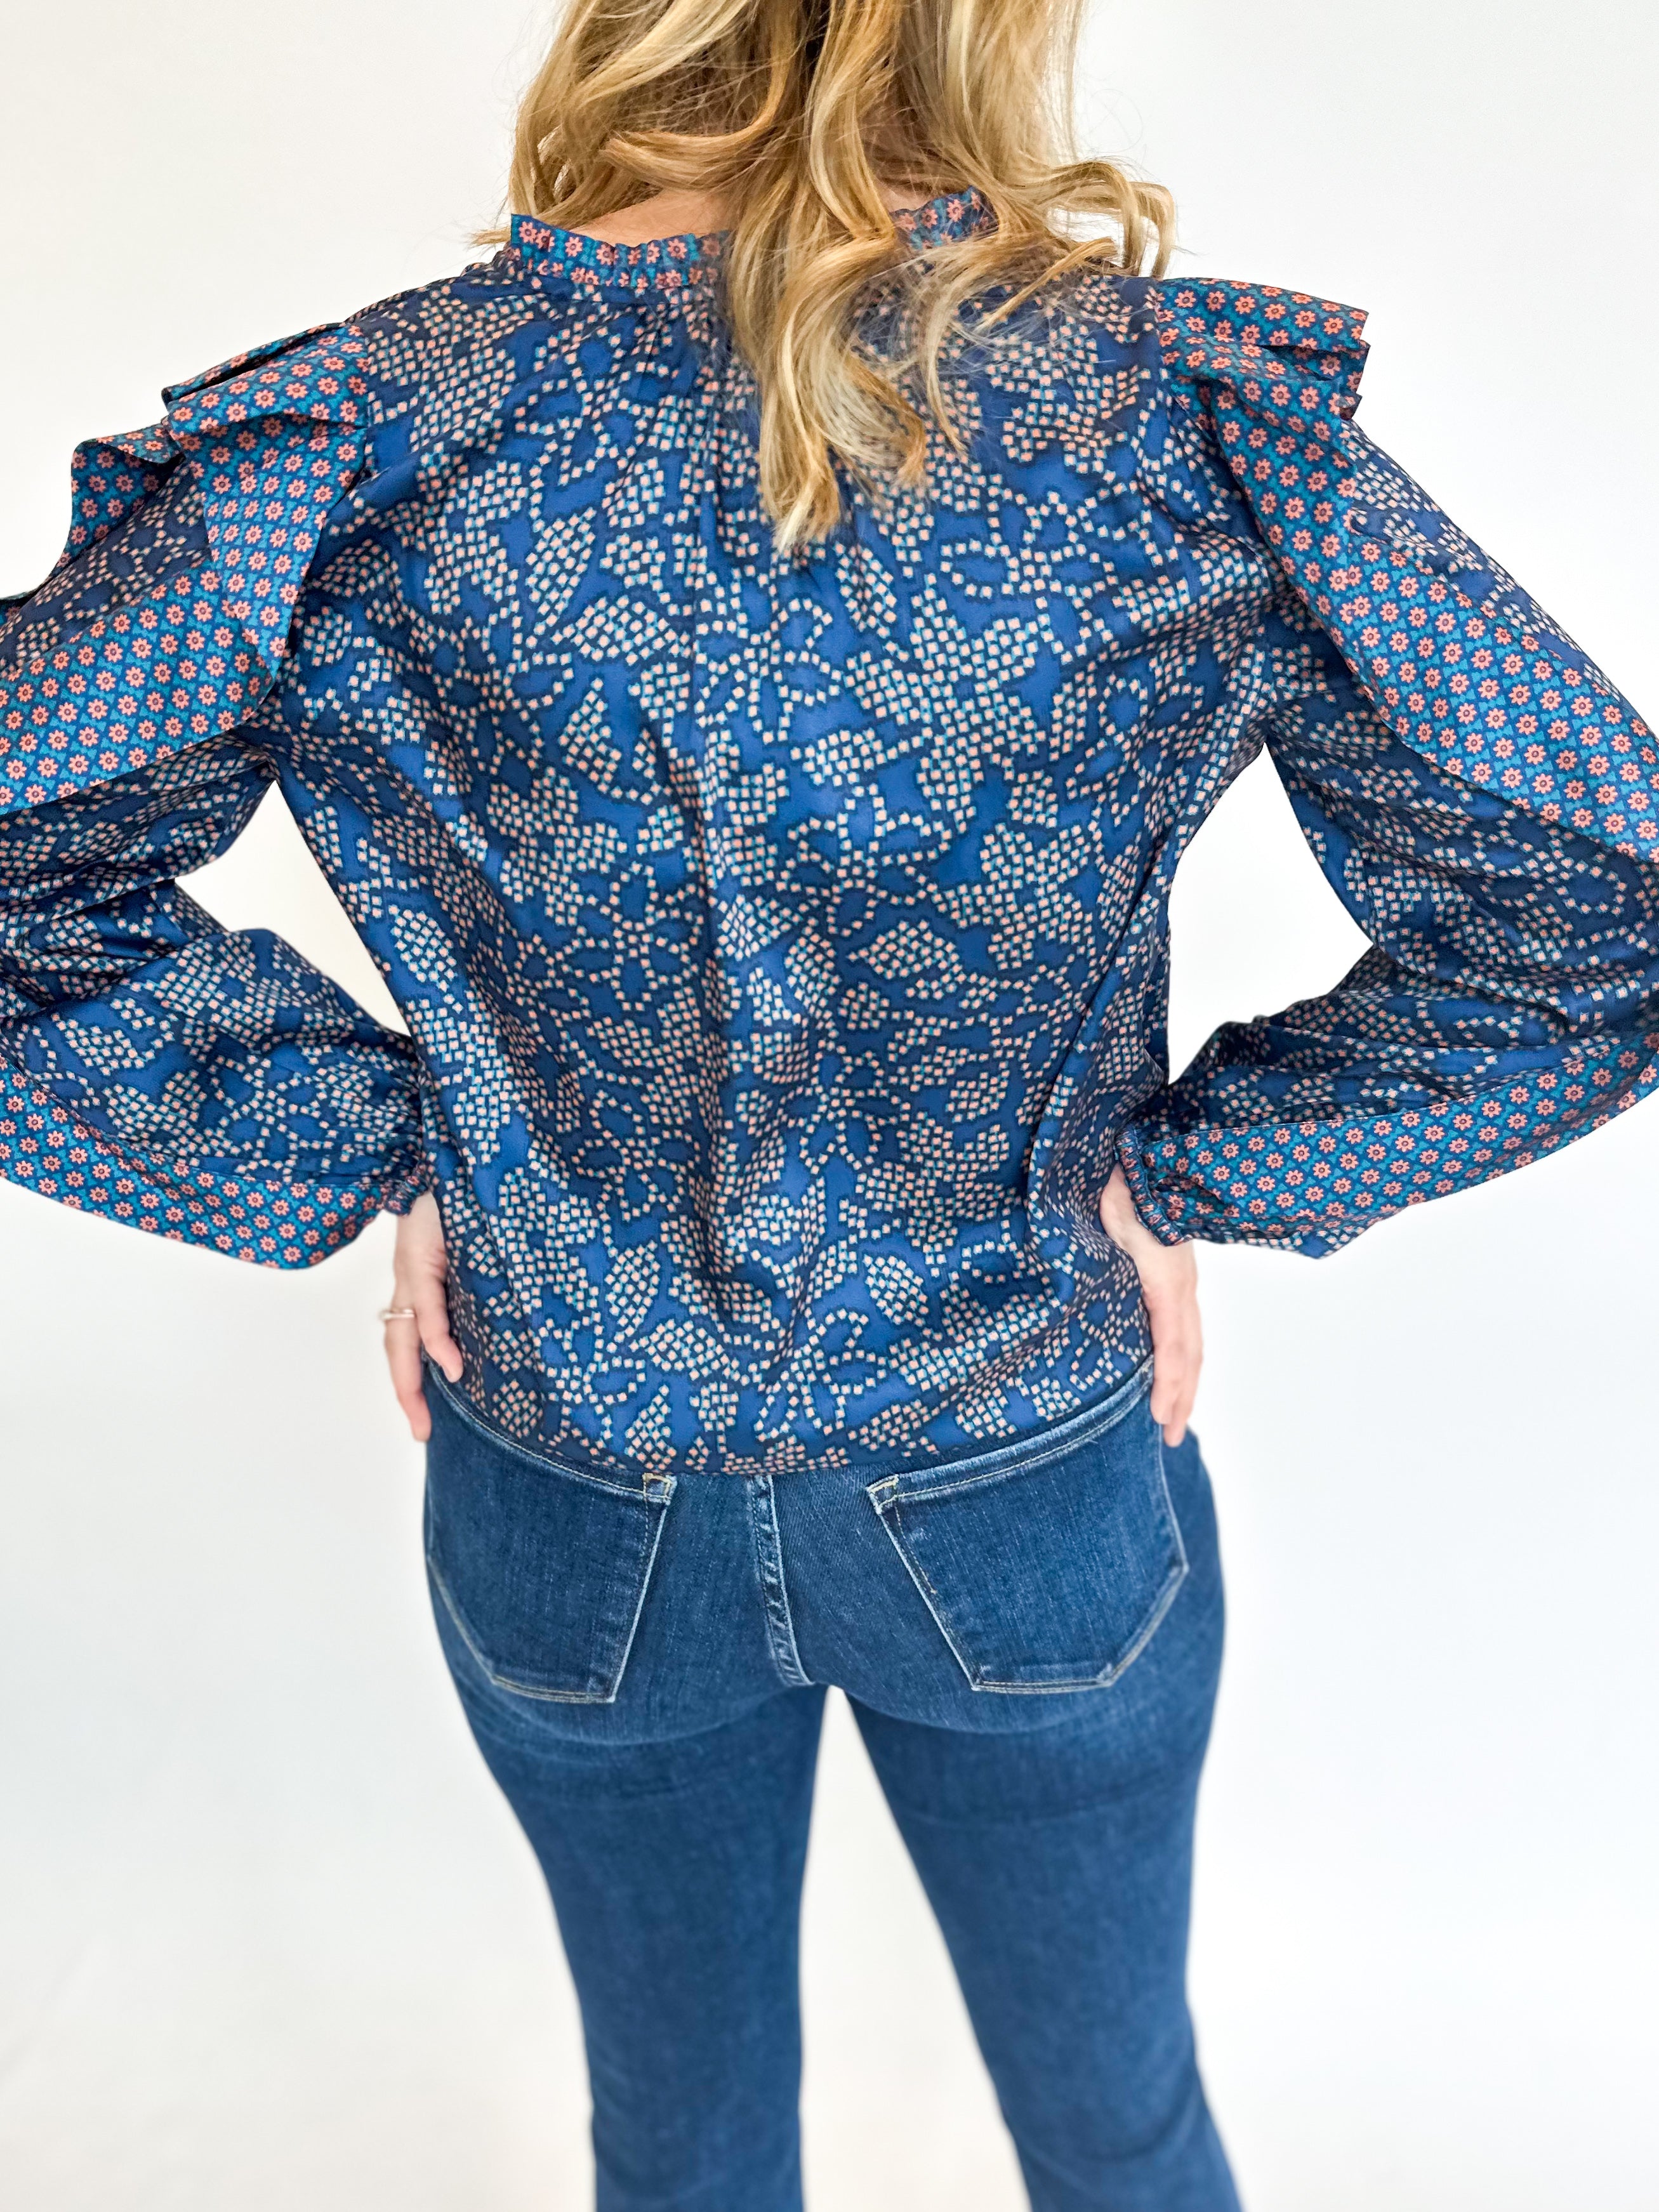 Navy Garden Blouse-200 Fashion Blouses-CURRENT AIR CLOTHING-July & June Women's Fashion Boutique Located in San Antonio, Texas